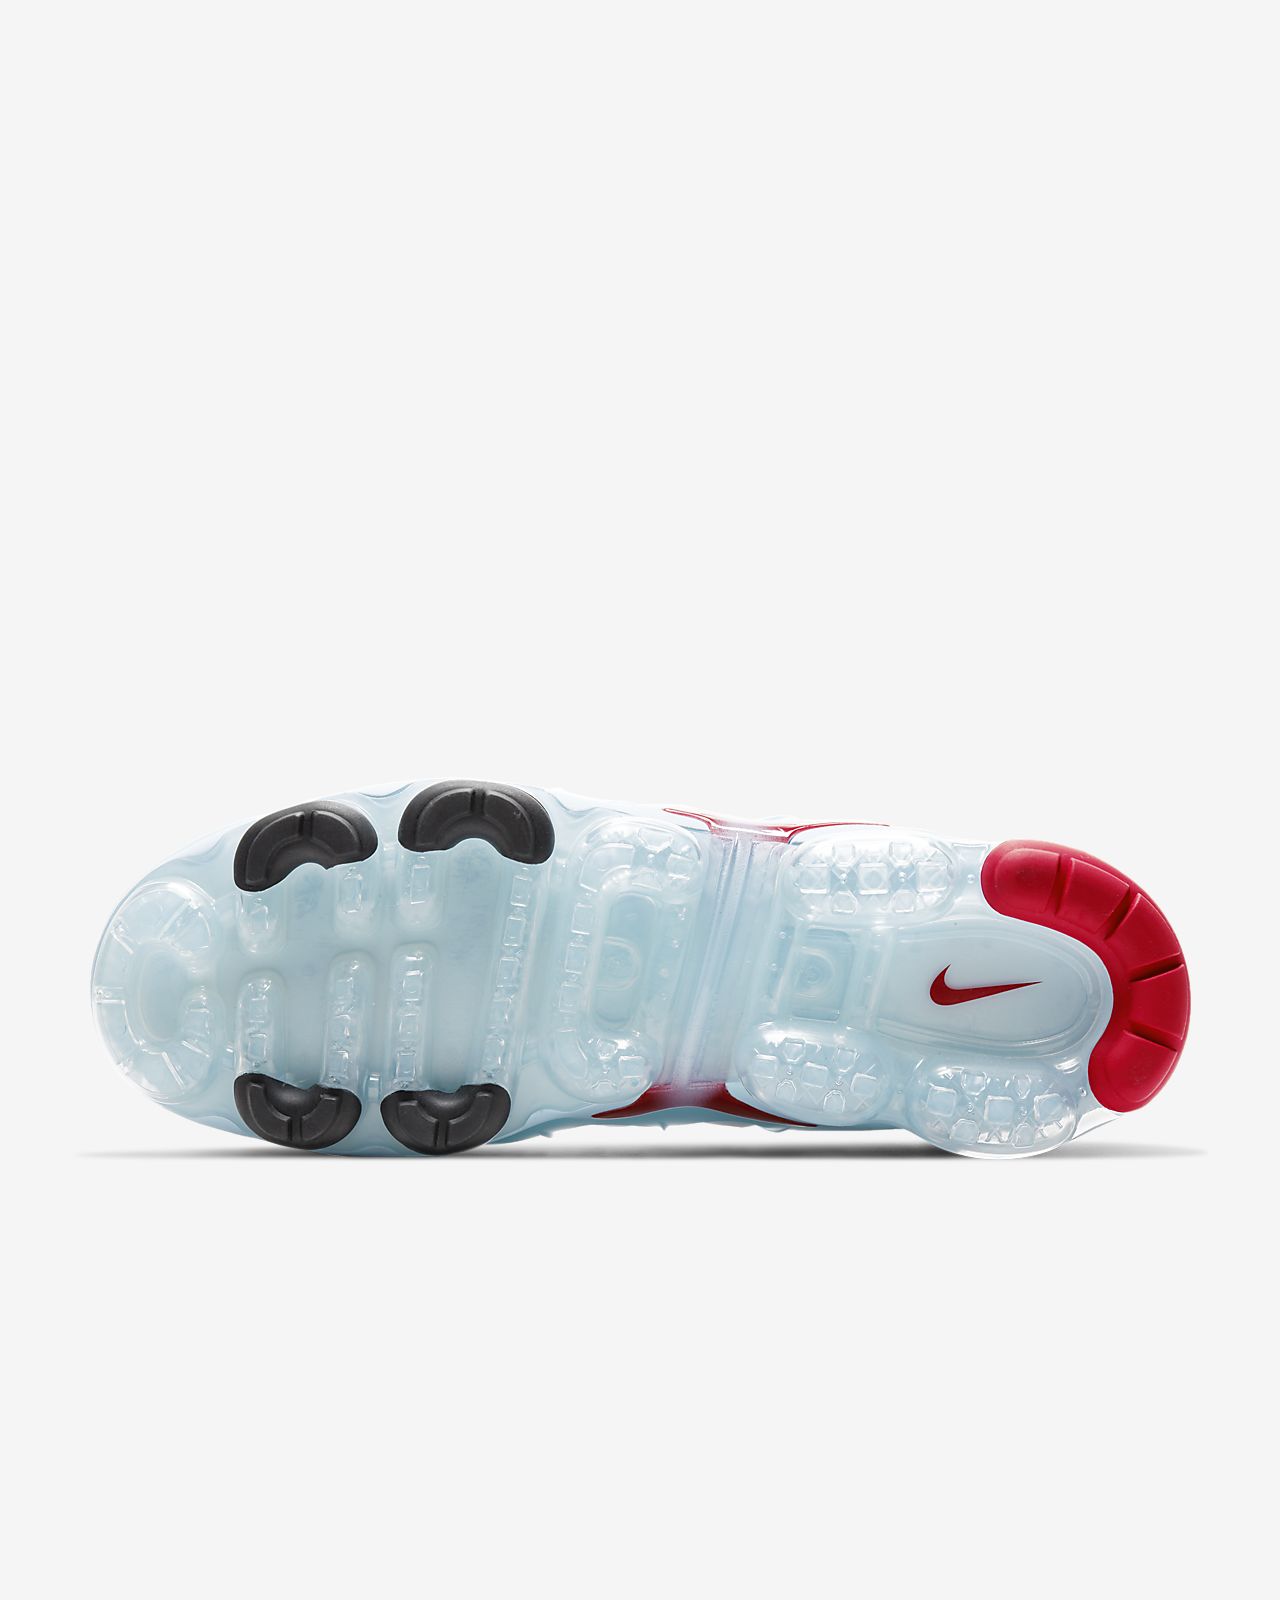 red and black vapormax plus Cheap Nike Air Max Shoes 1 90 95